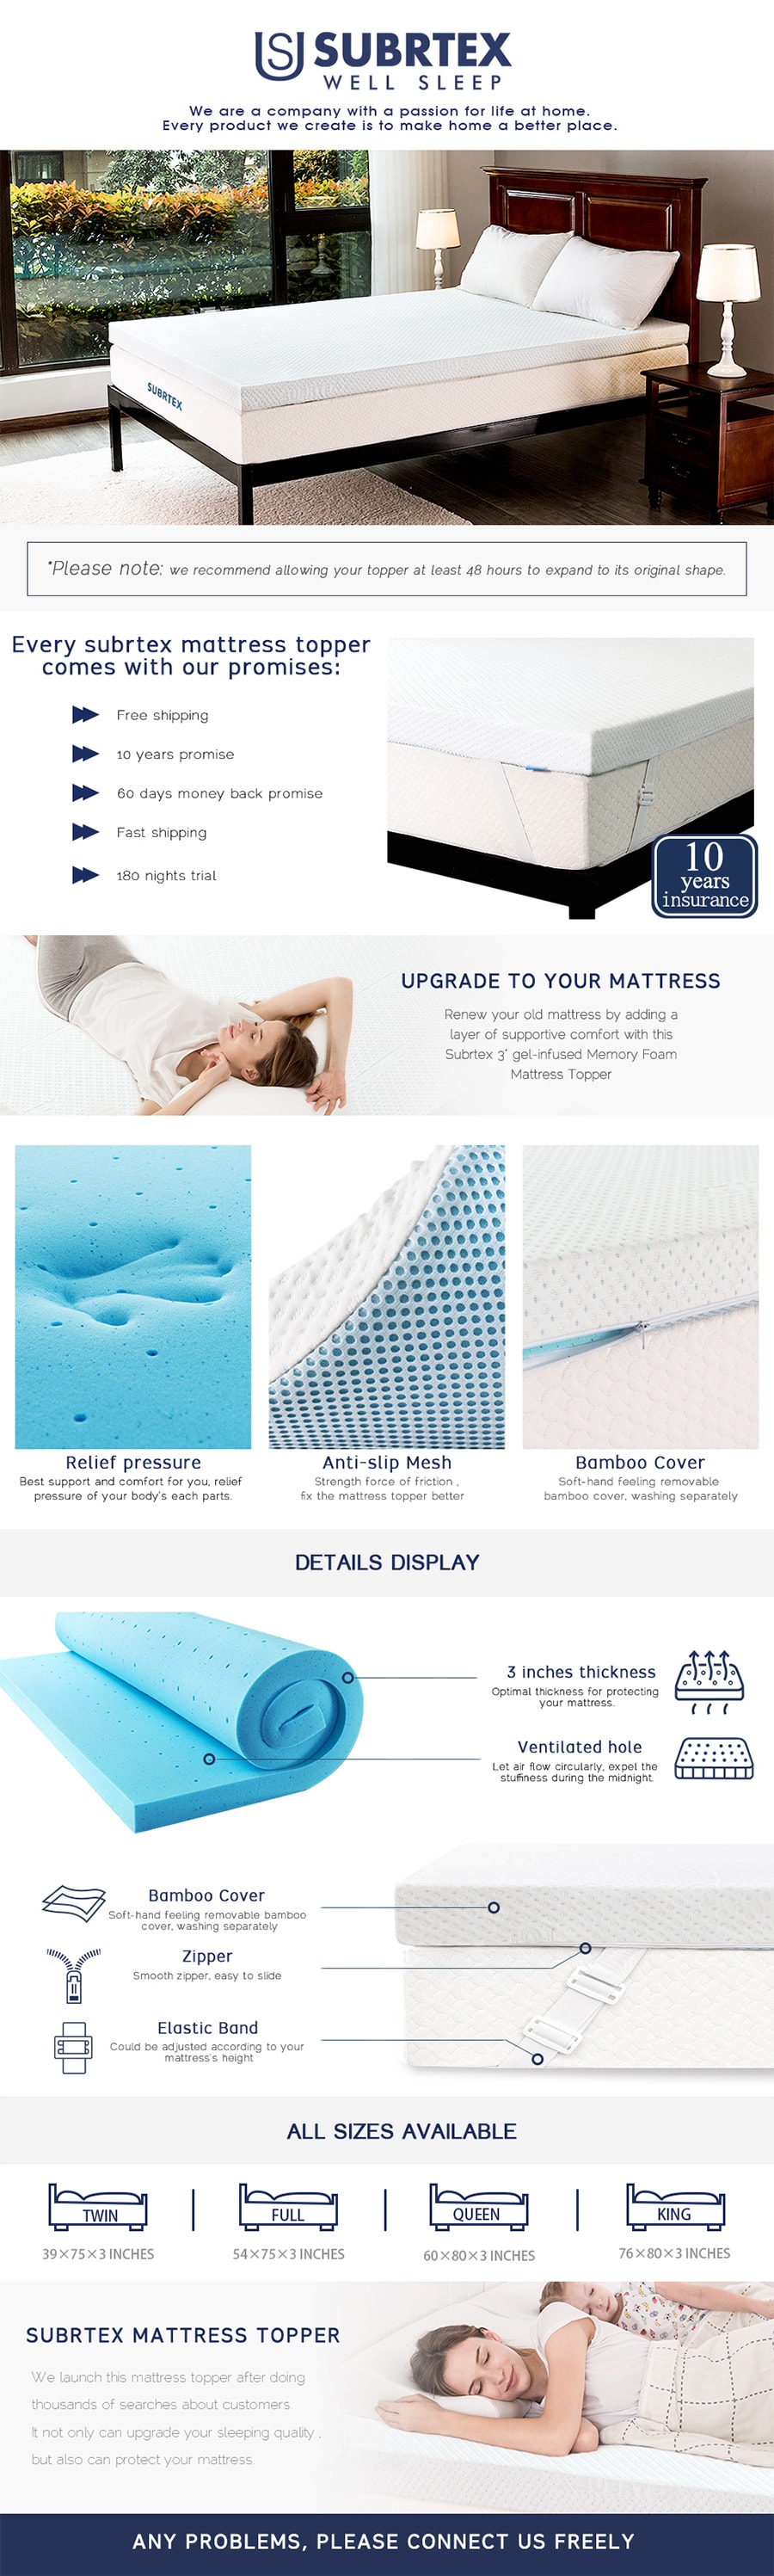 3 inches Gel-Infused Memory Foam Bed Mattress Topper Cover Full 1 28 Ibs